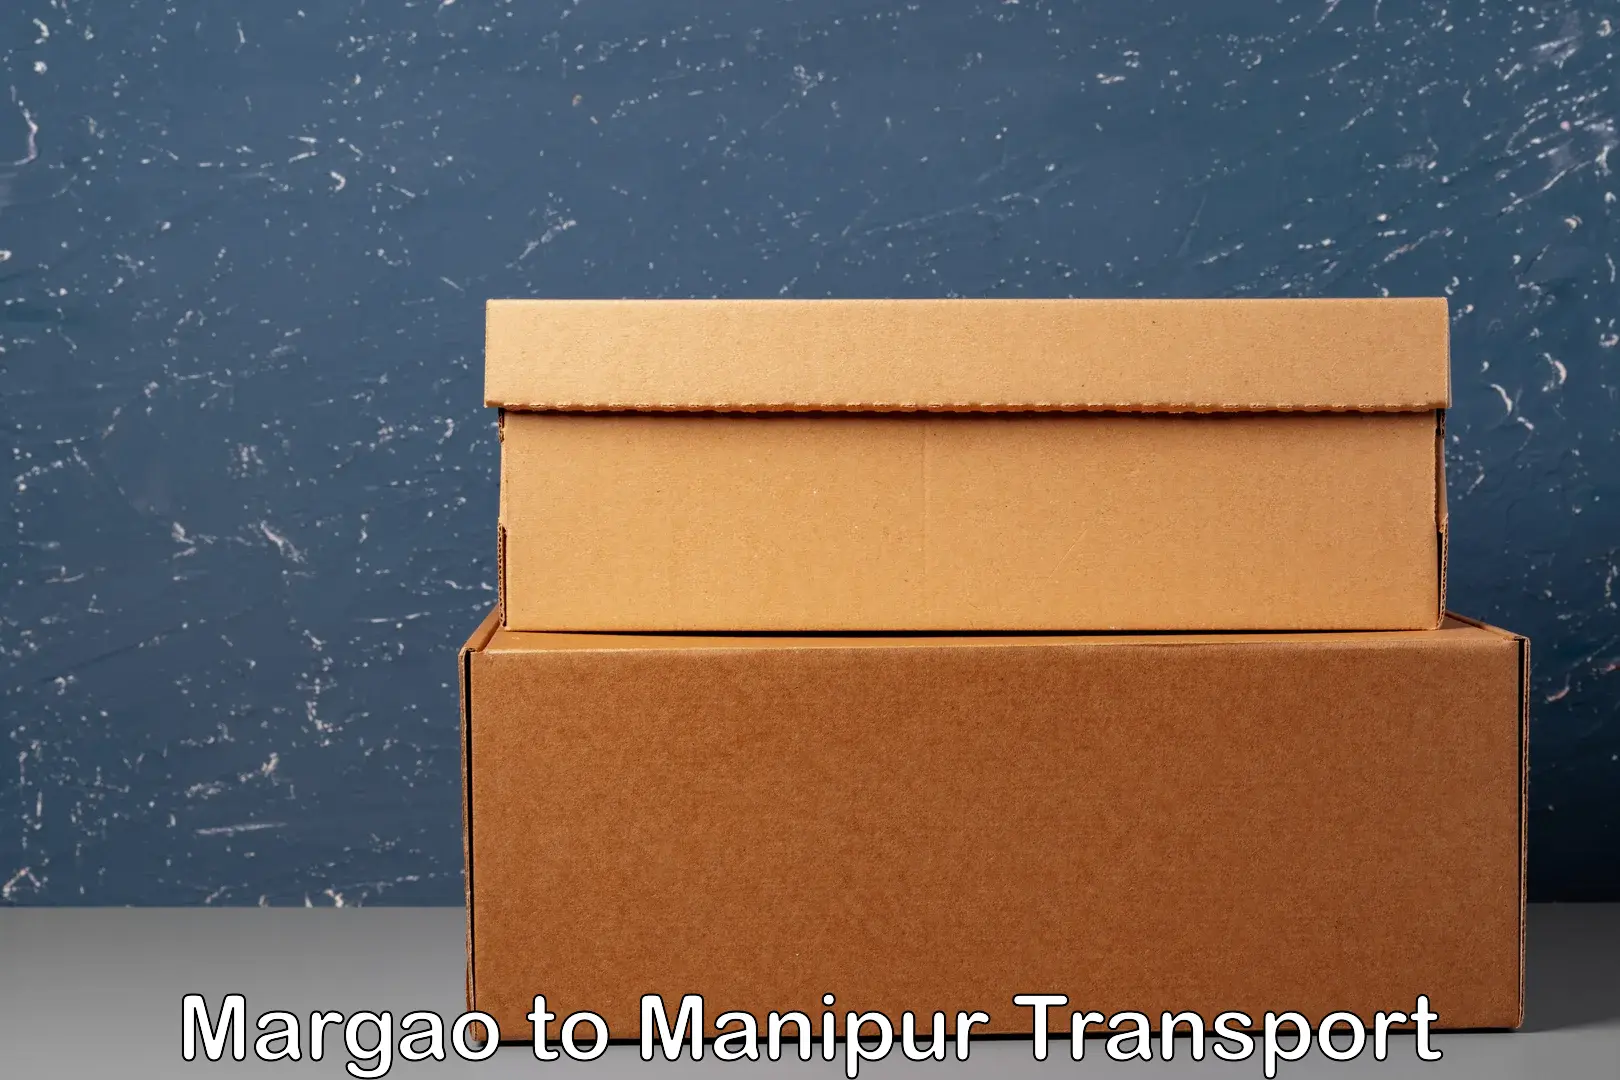 Lorry transport service Margao to Manipur